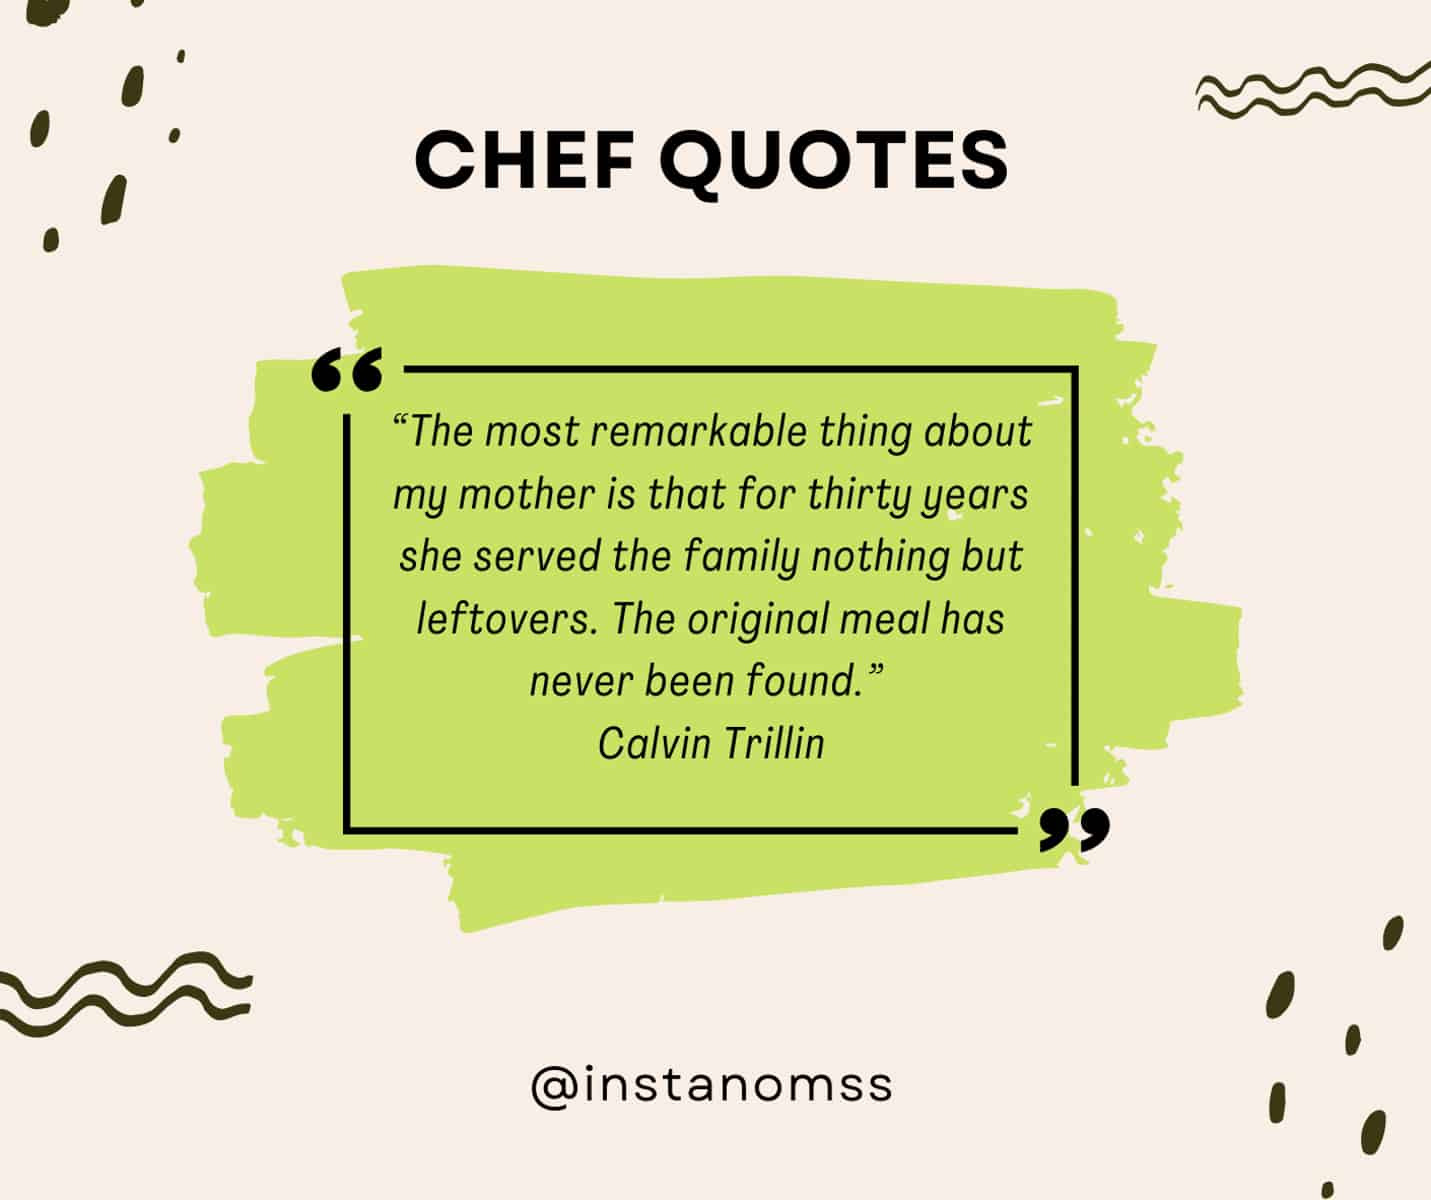 “The most remarkable thing about my mother is that for thirty years she served the family nothing but leftovers. The original meal has never been found.” Calvin Trillin